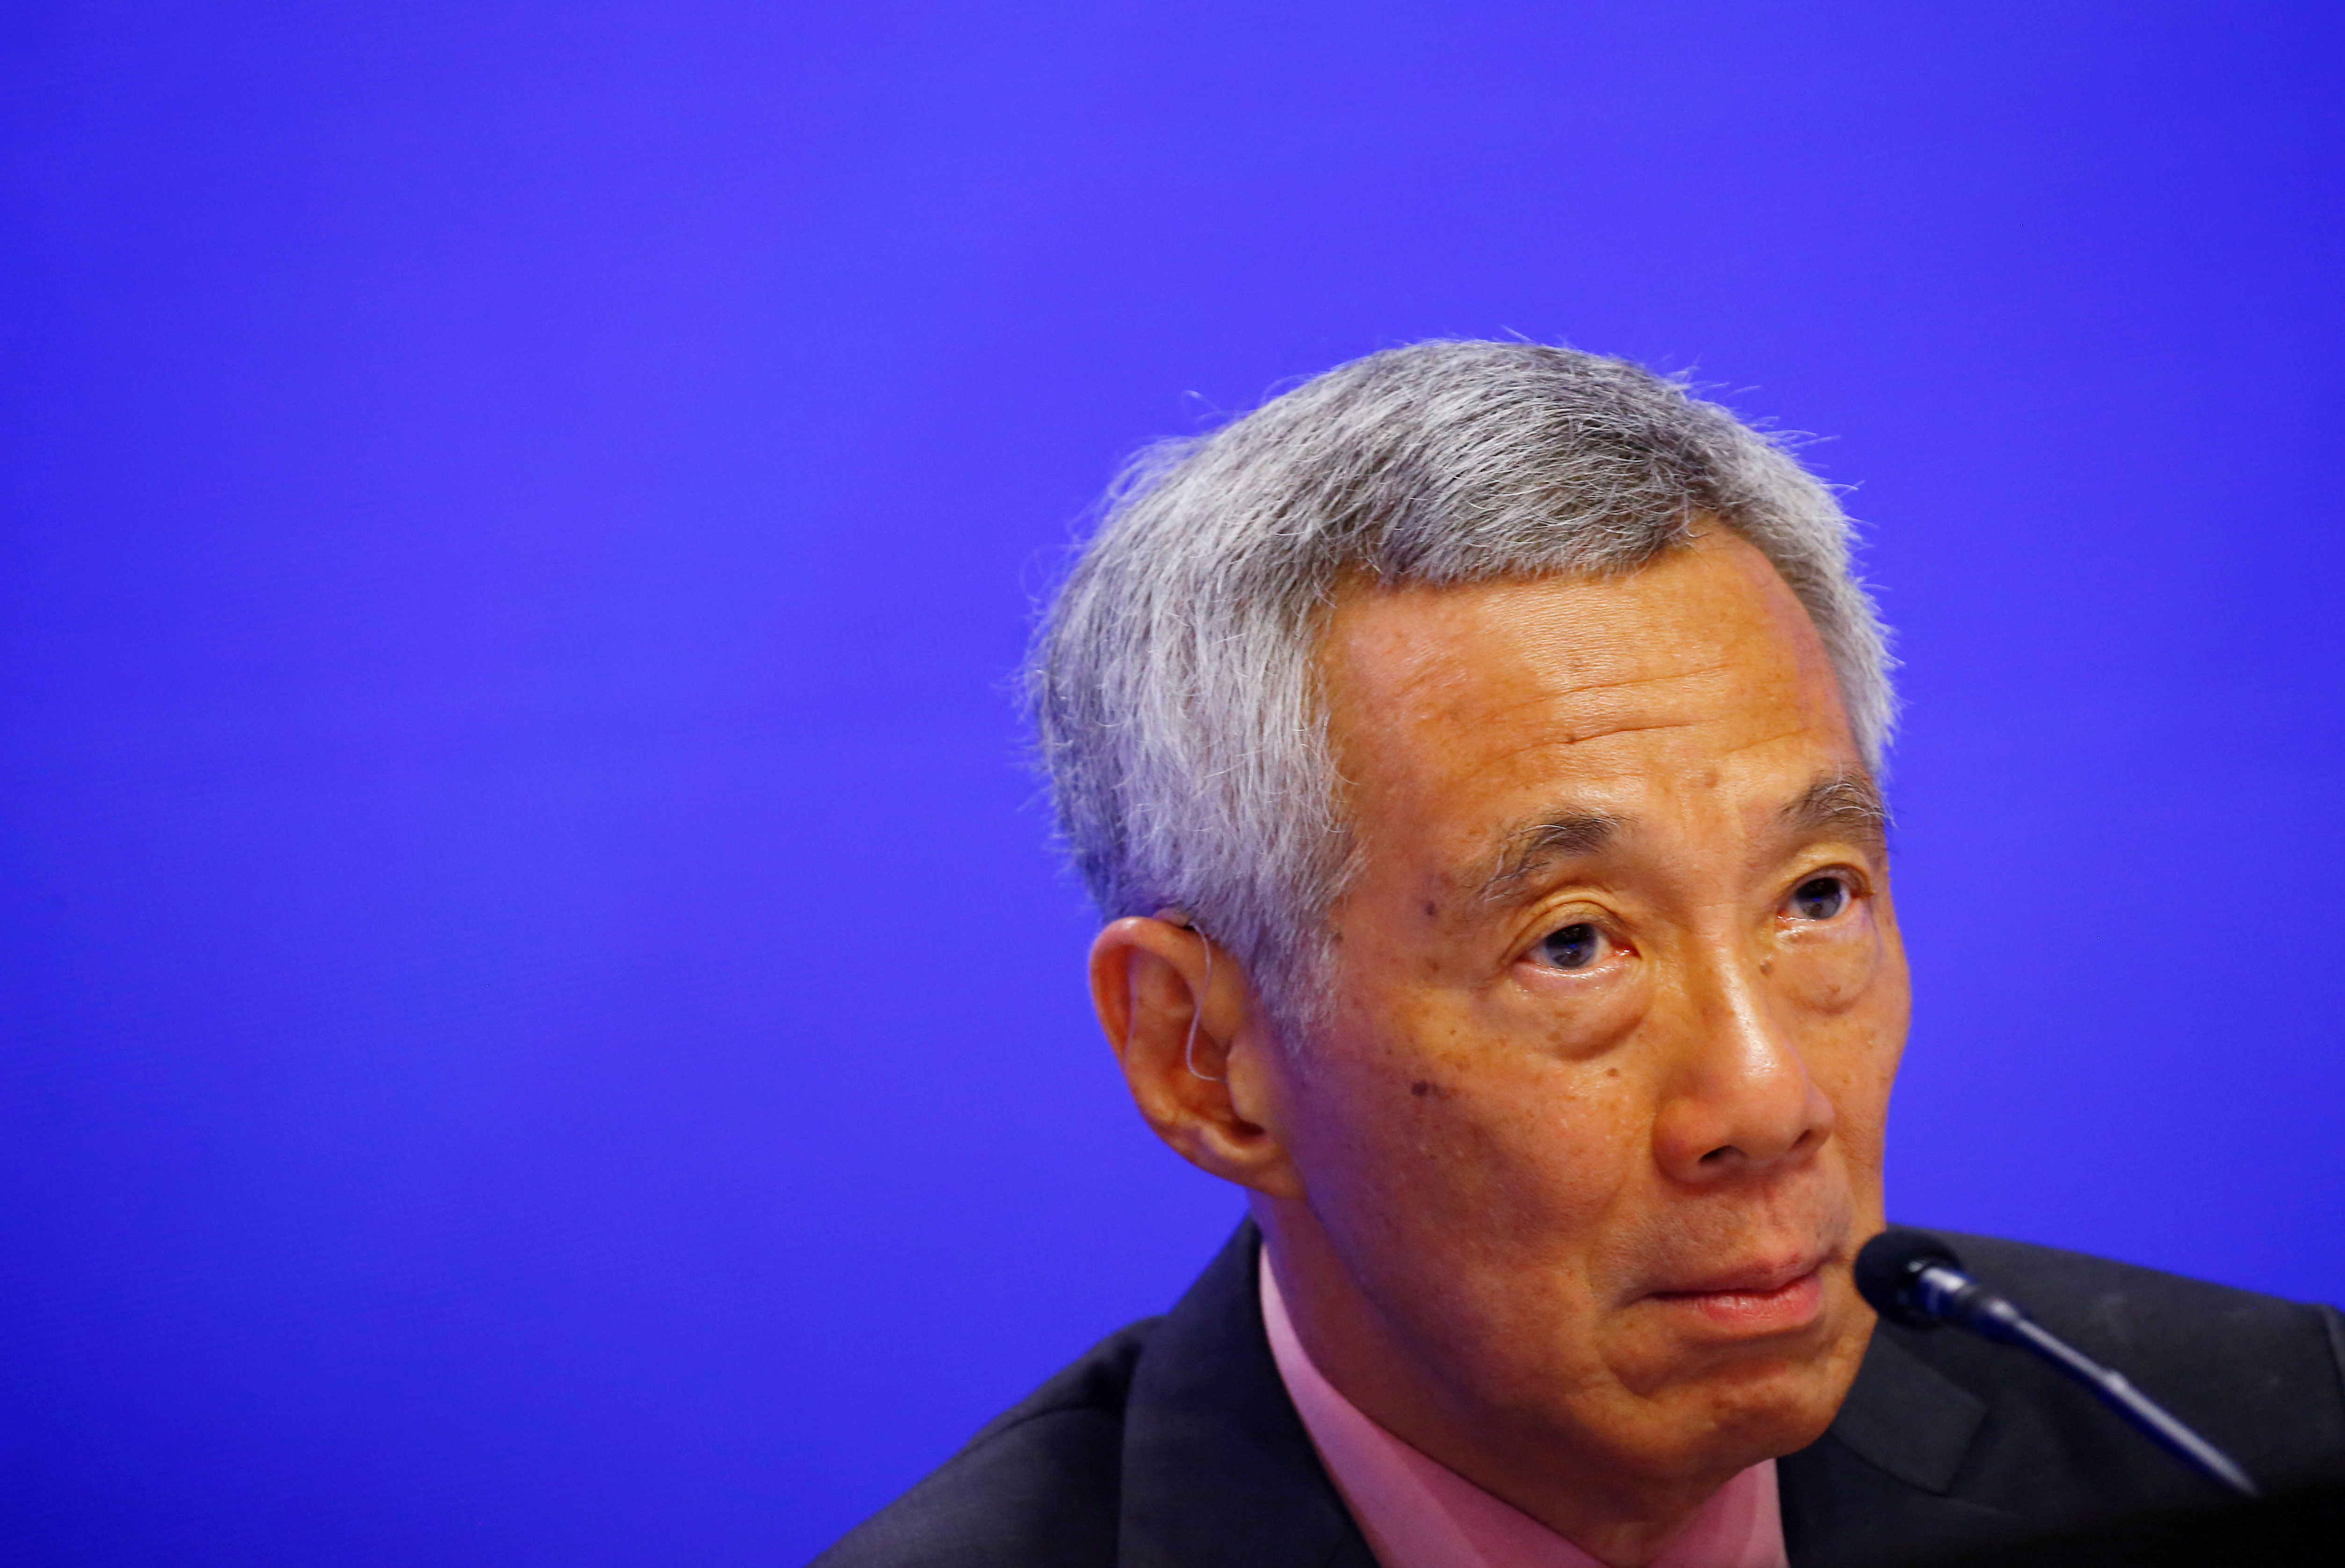 Singapore's Prime Minister Lee Hsien Loong attends the IISS Shangri-la Dialogue in Singapore